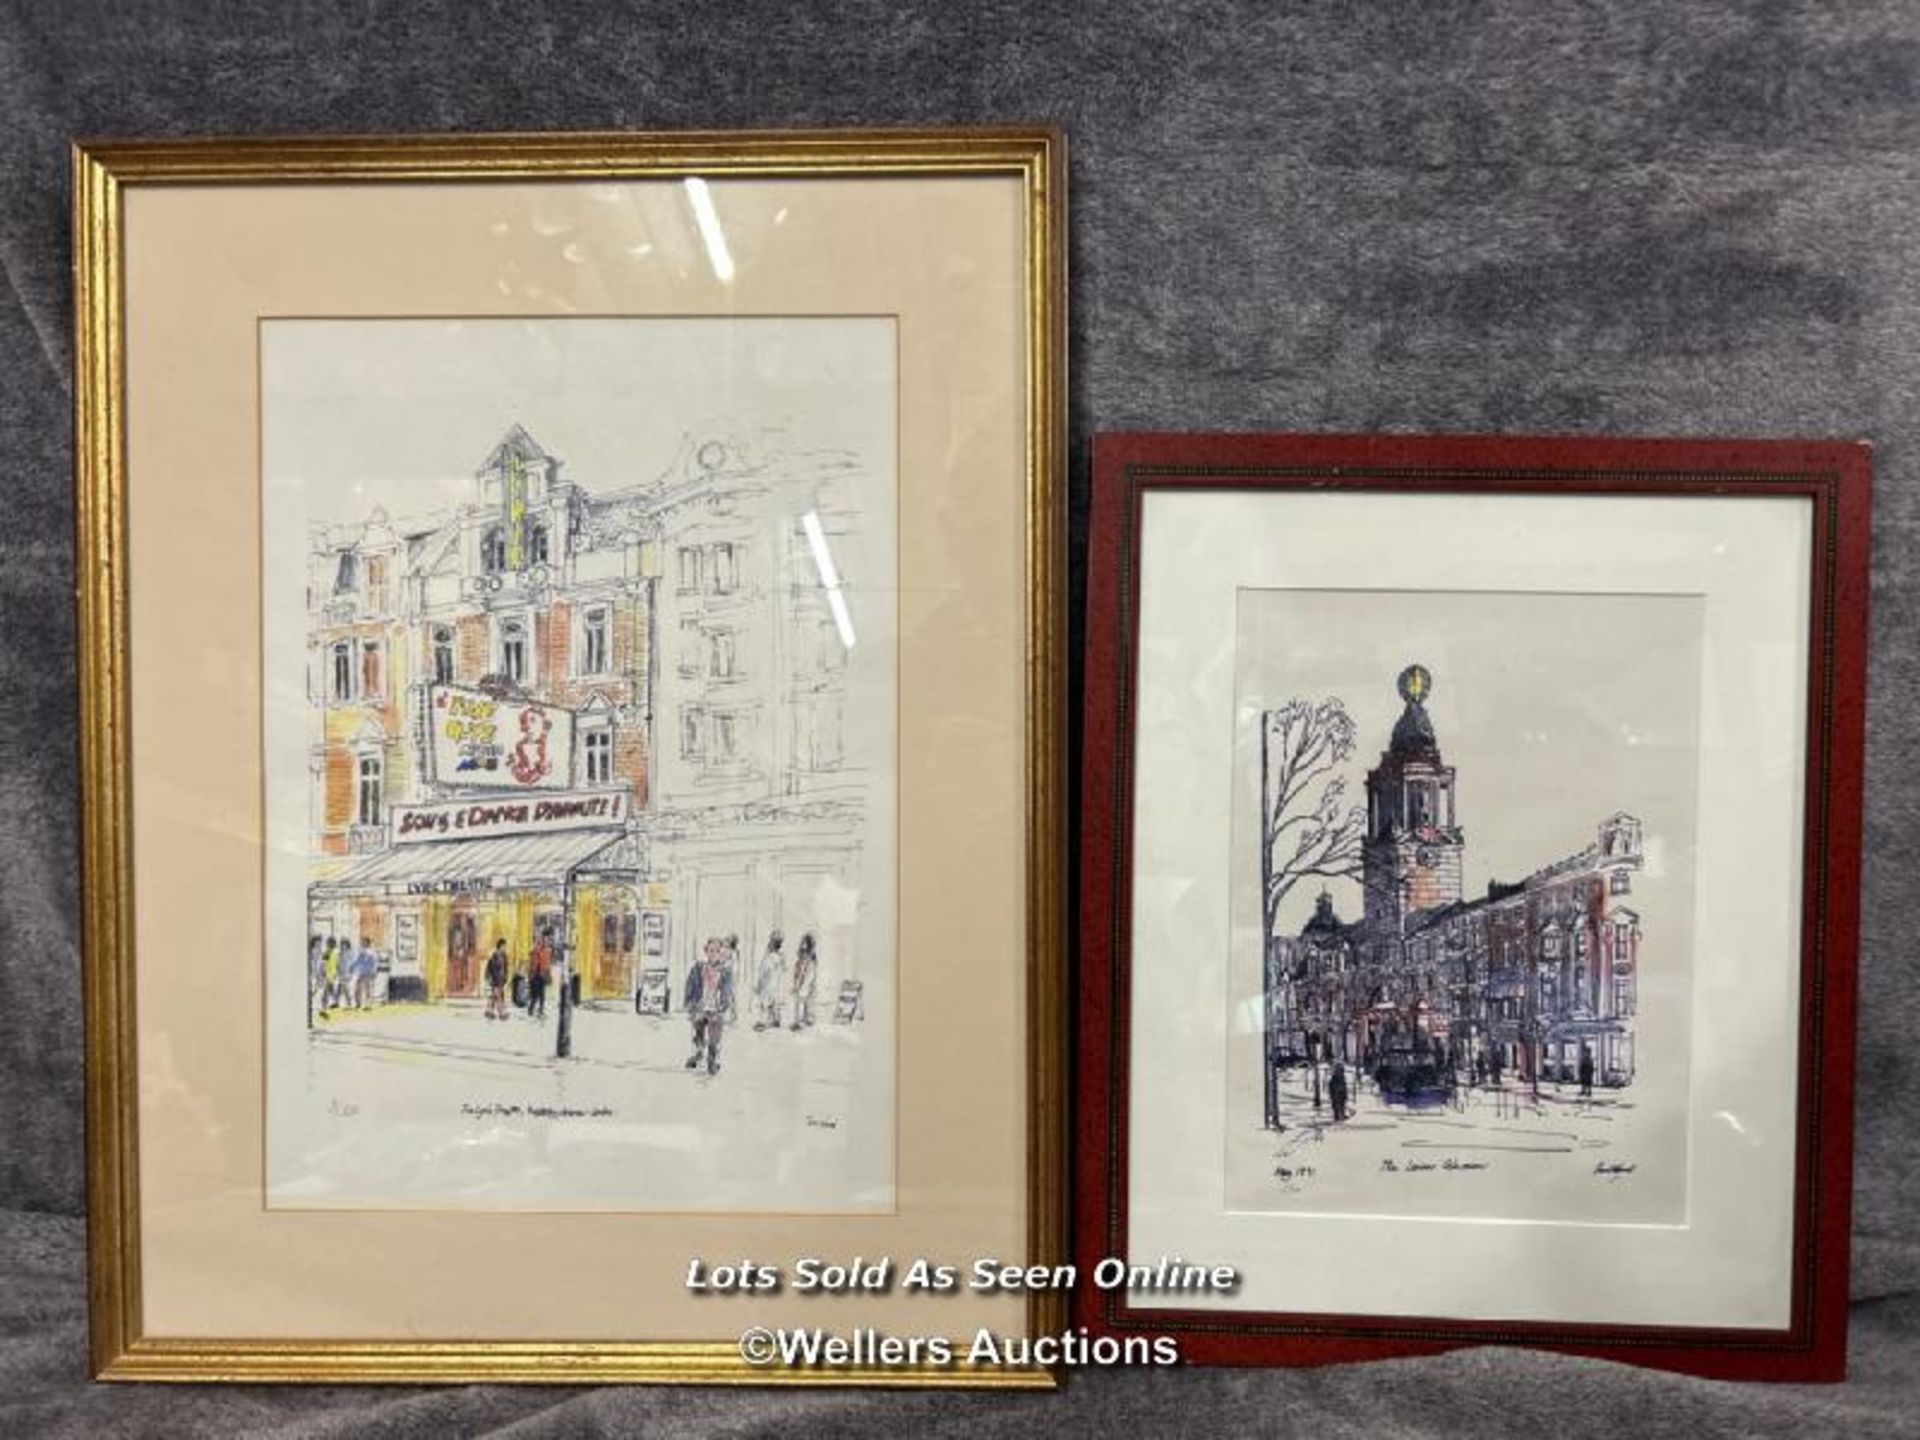 Two prints by the same artist numbered 3/300 and 1/300, largest 28x39cm